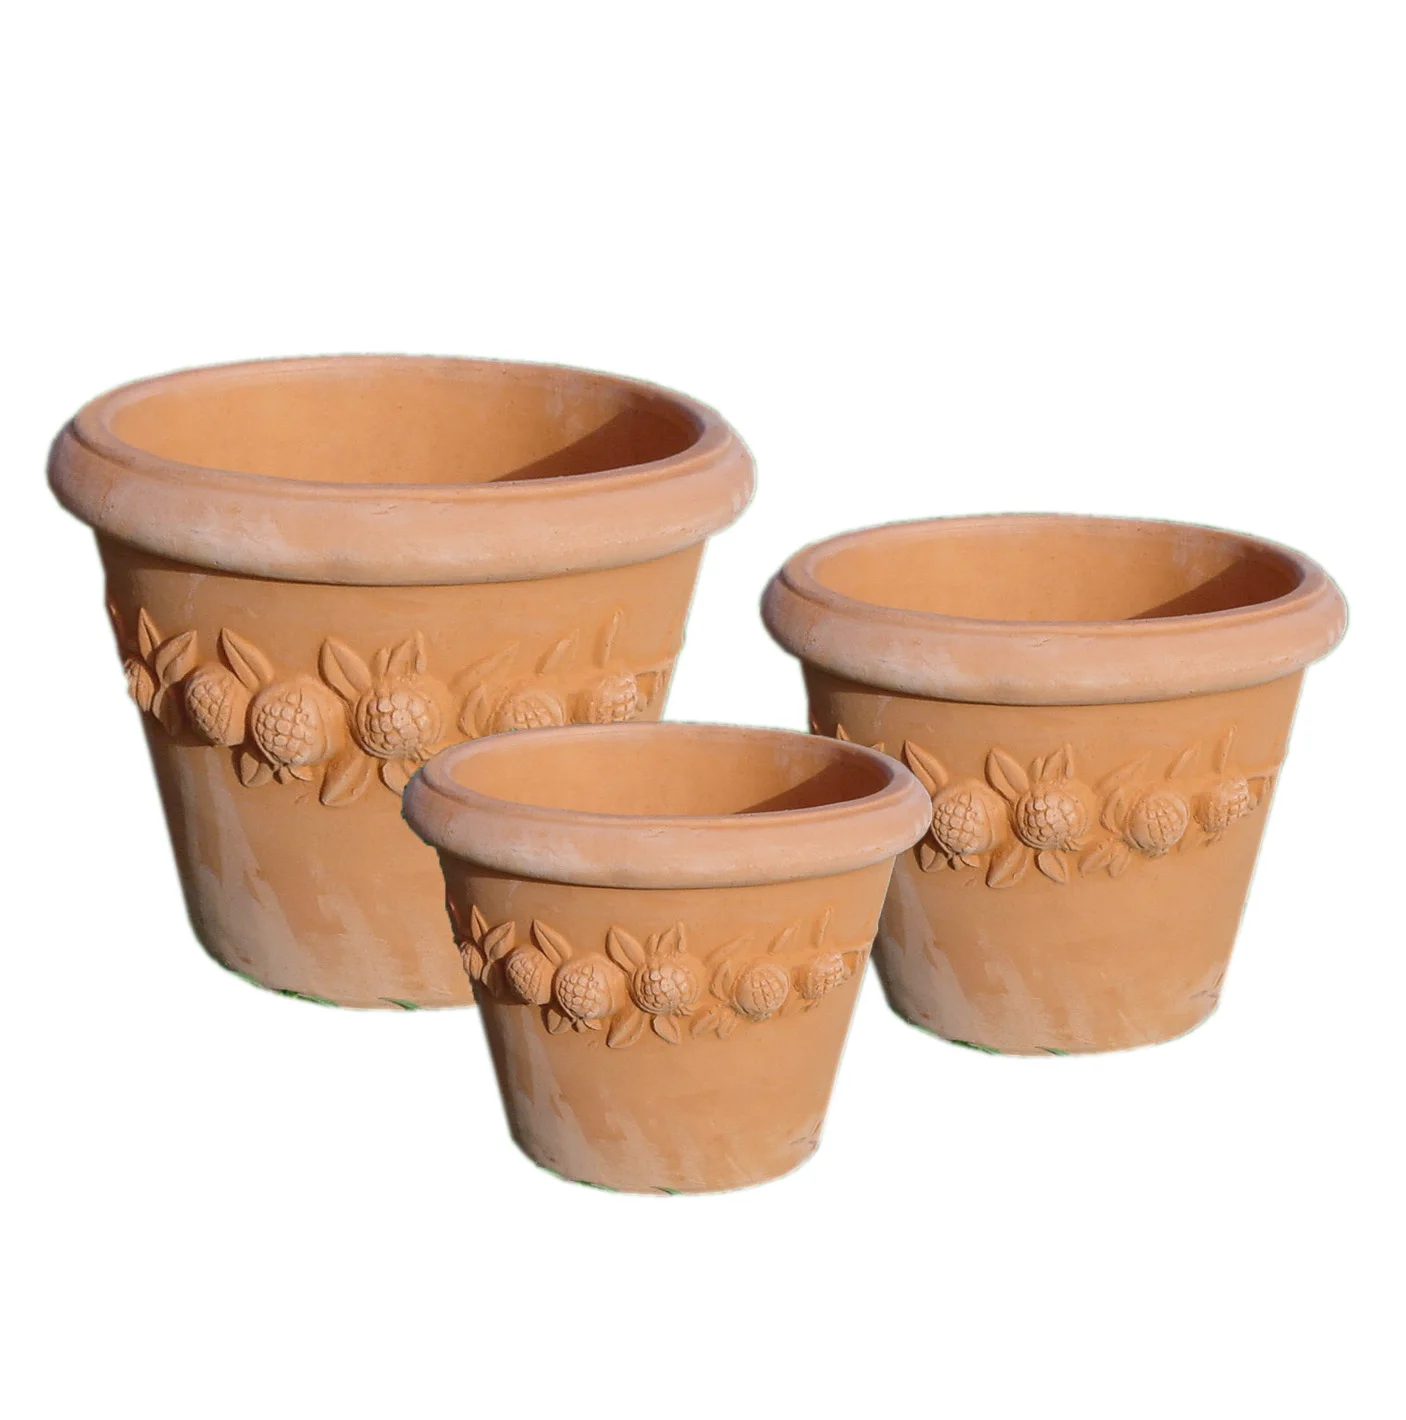 Outdoor Indoor Home Decor Terracotta Flower Pot Ceramic Clay Planter for Nursery or Shopping Mall Design Shape for Floor Use